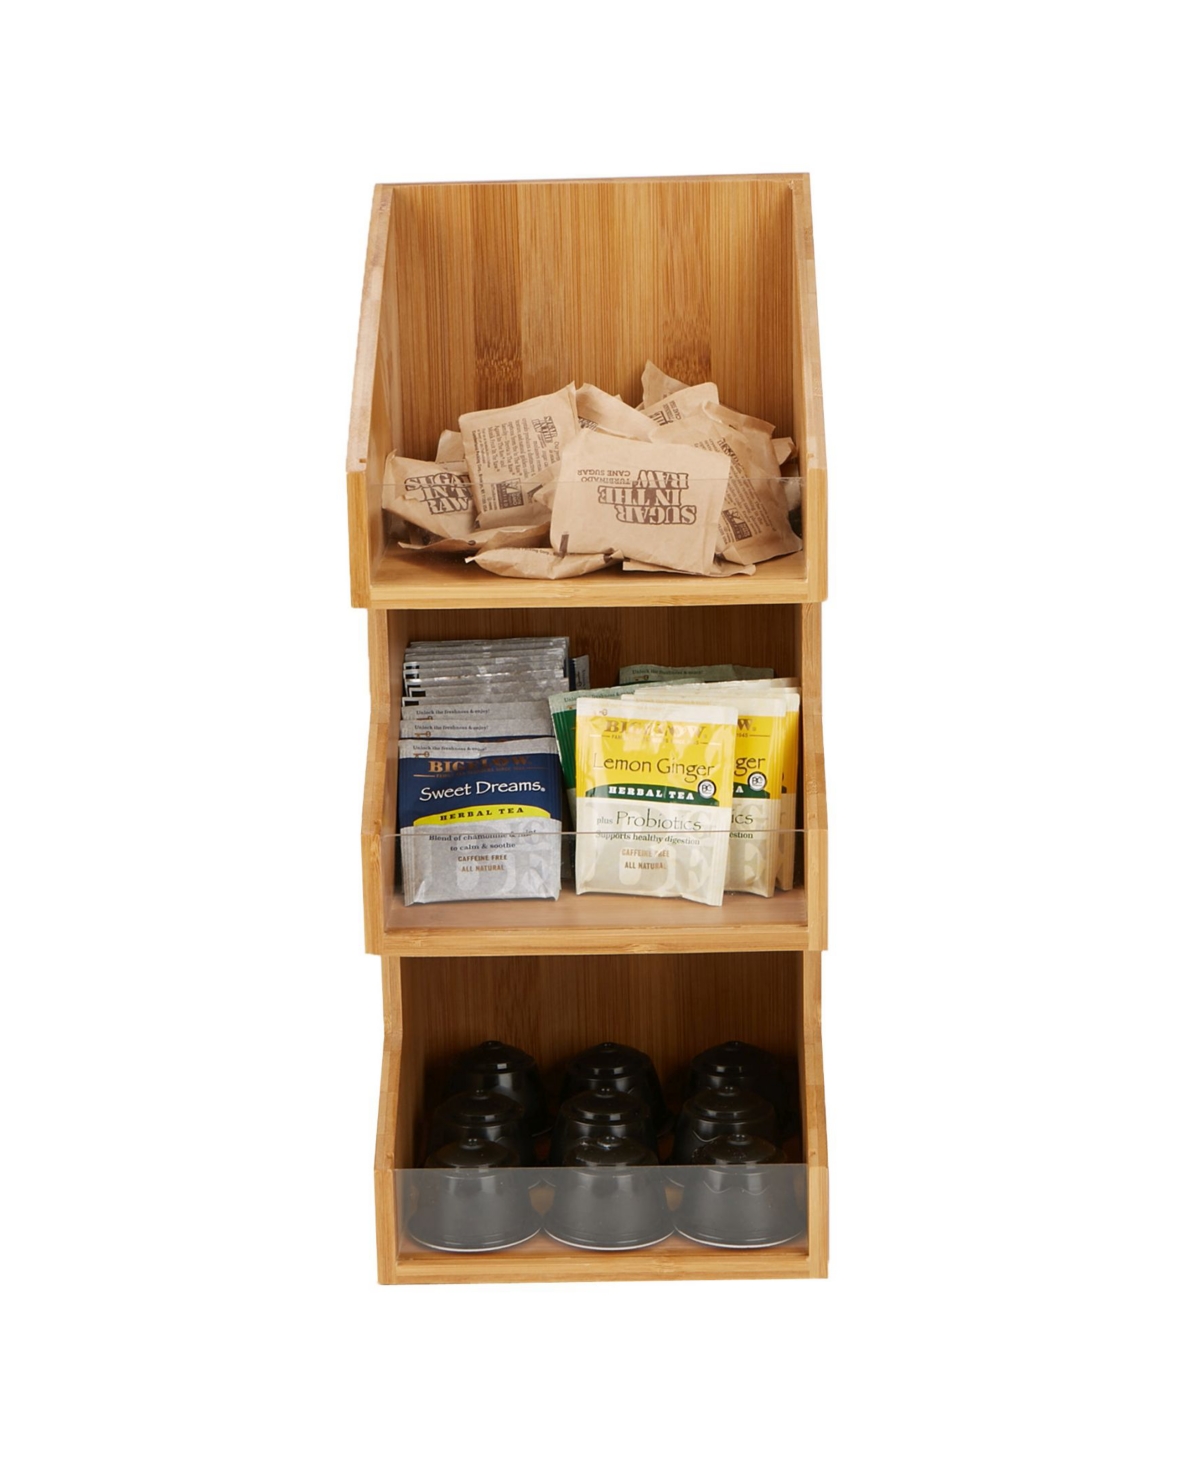 Coffee Condiment and Accessories Caddy Organizer - Brown